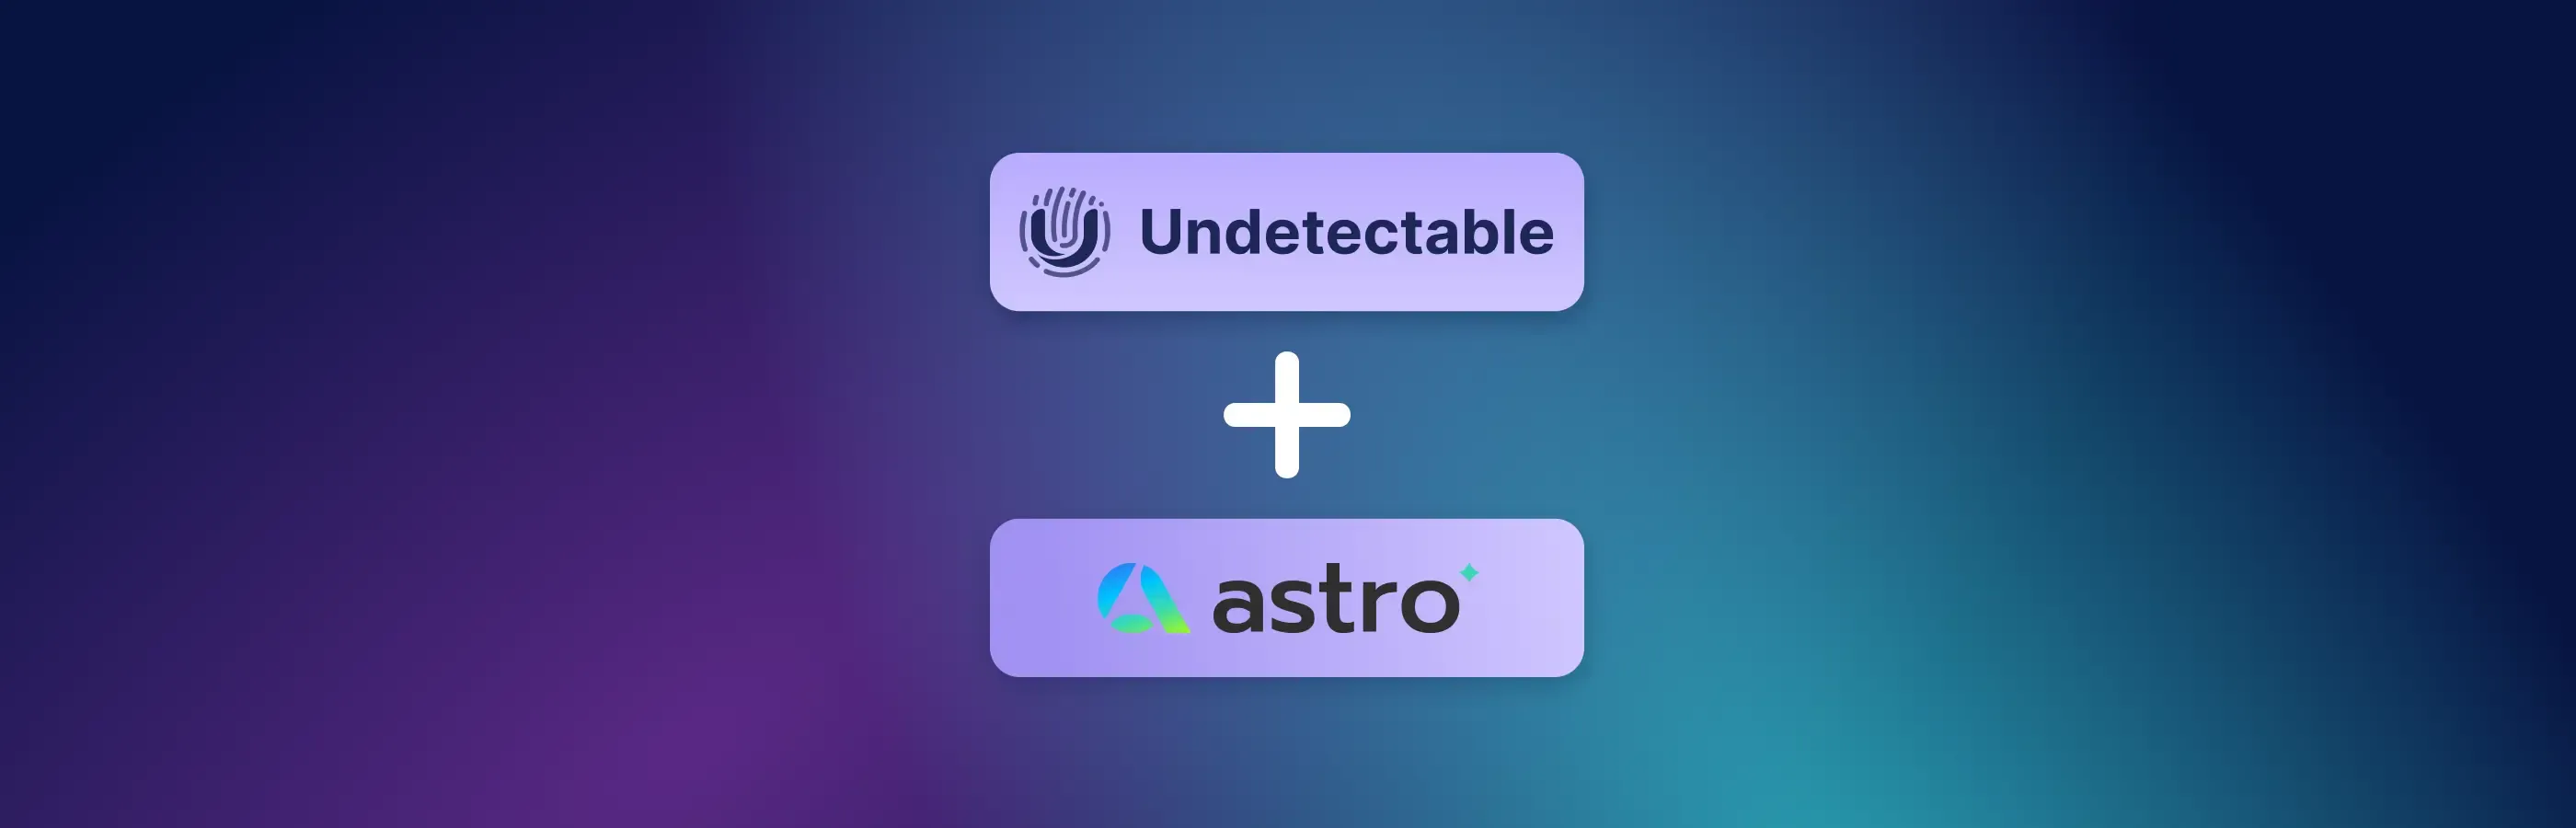 How to use Astro with Undetectable